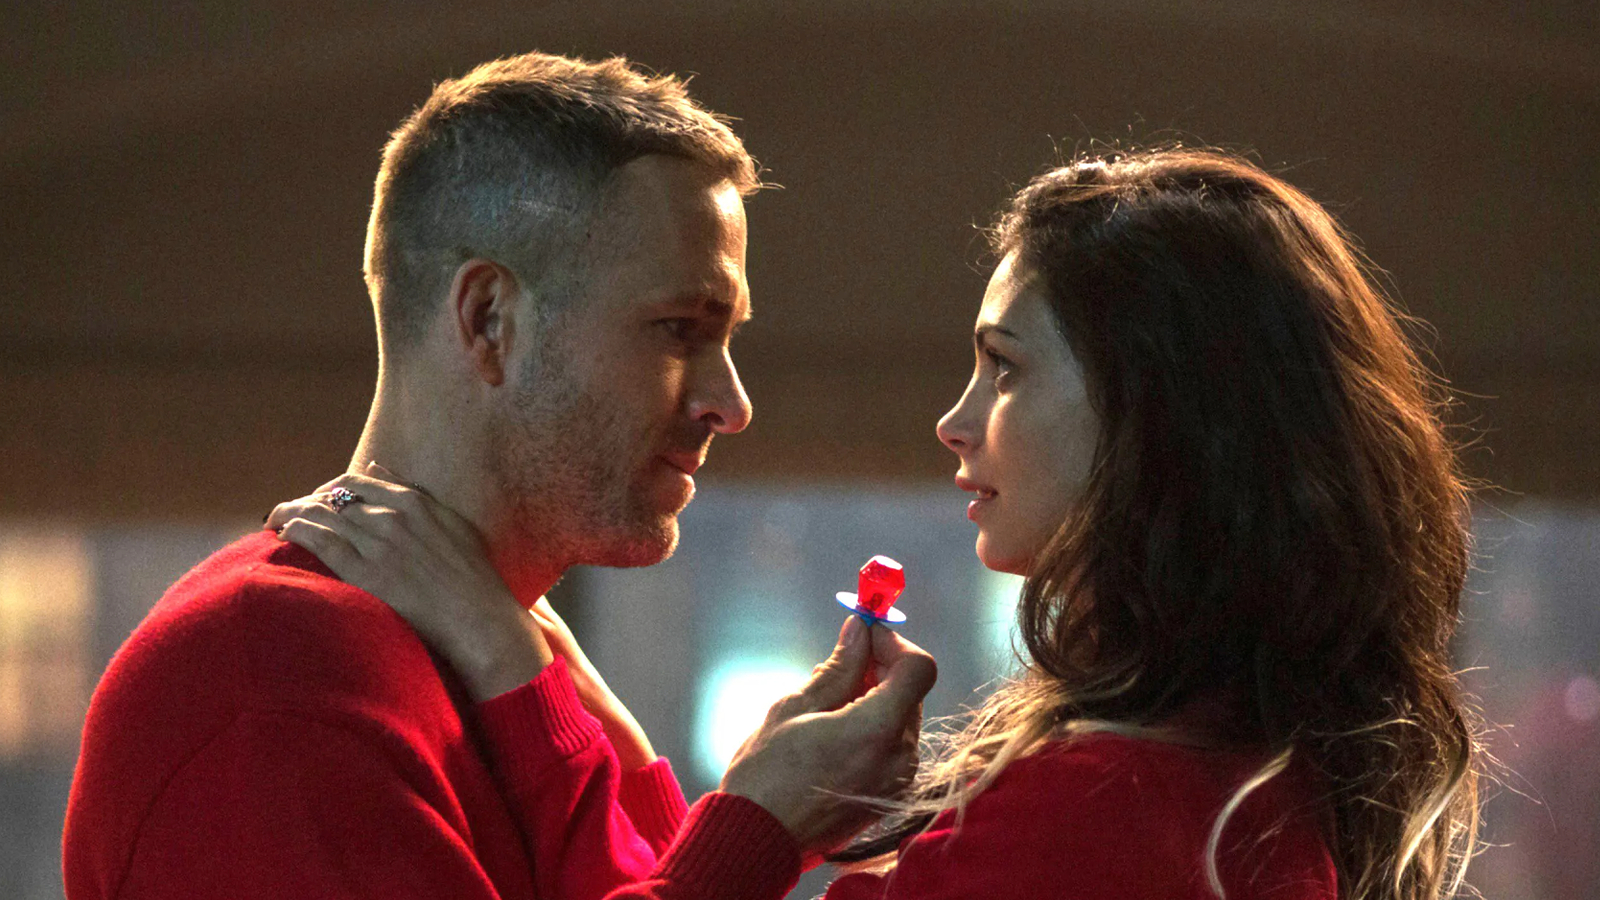 Ryan Reynolds as Wade Wilson and Morena Baccarin as Vanessa in the Deadpool franchise